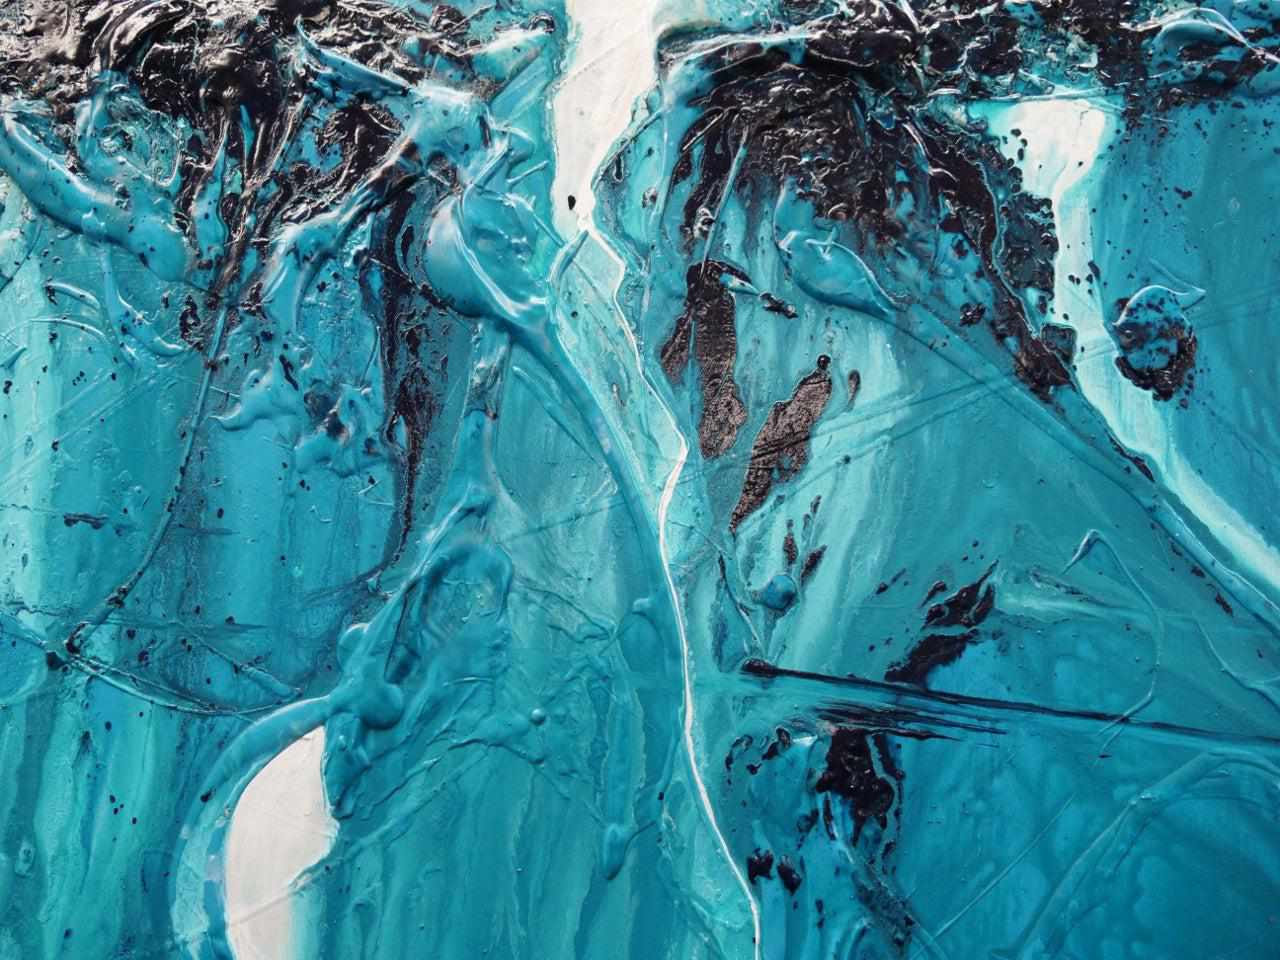 Turquoise Moon 120cm x 100cm Malt Teal Textured Abstract Painting